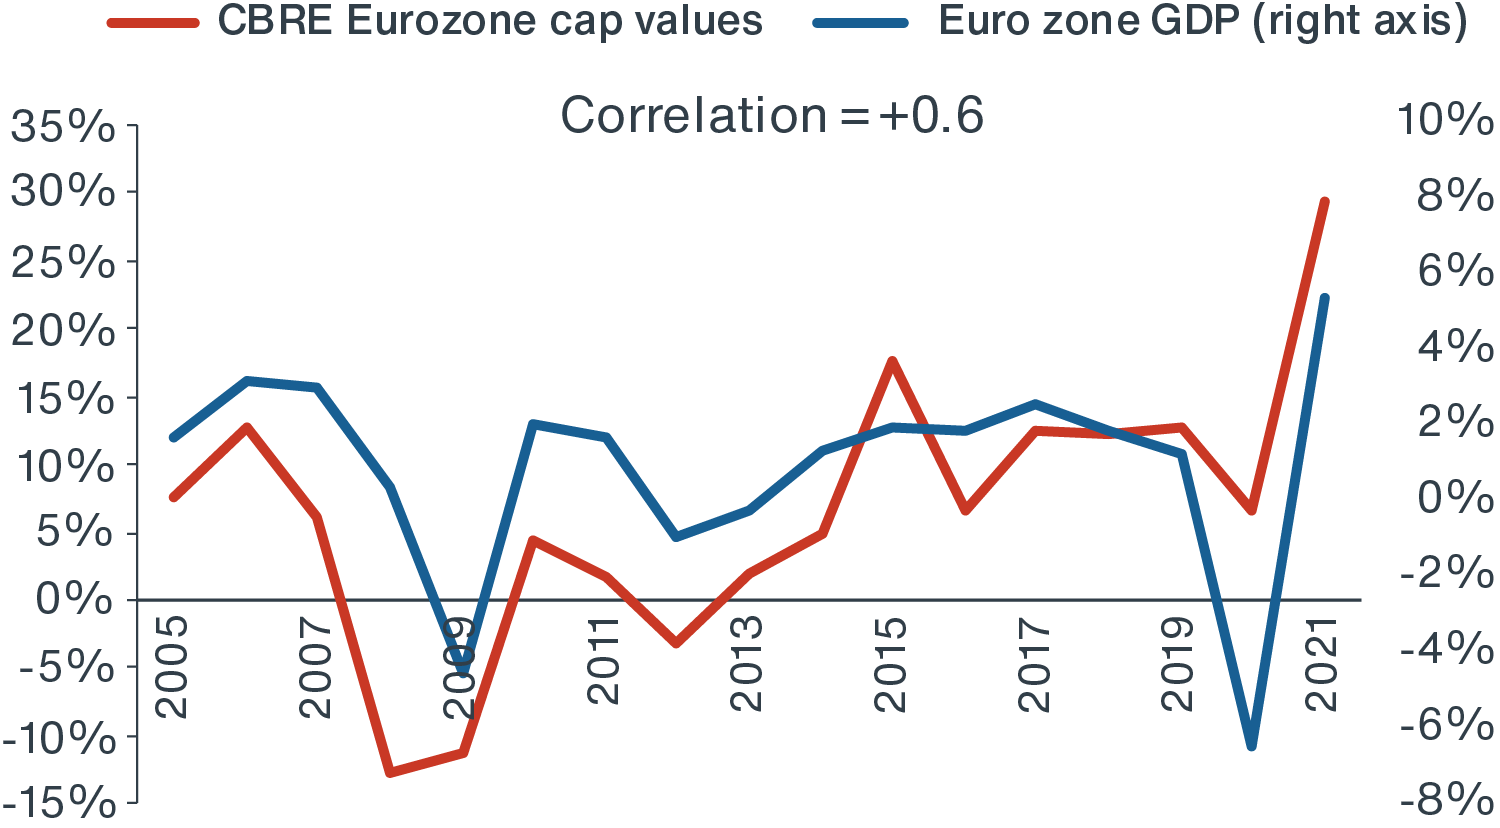 Chart showing logistics capital values tending to correlate relatively strongly with GDP growth